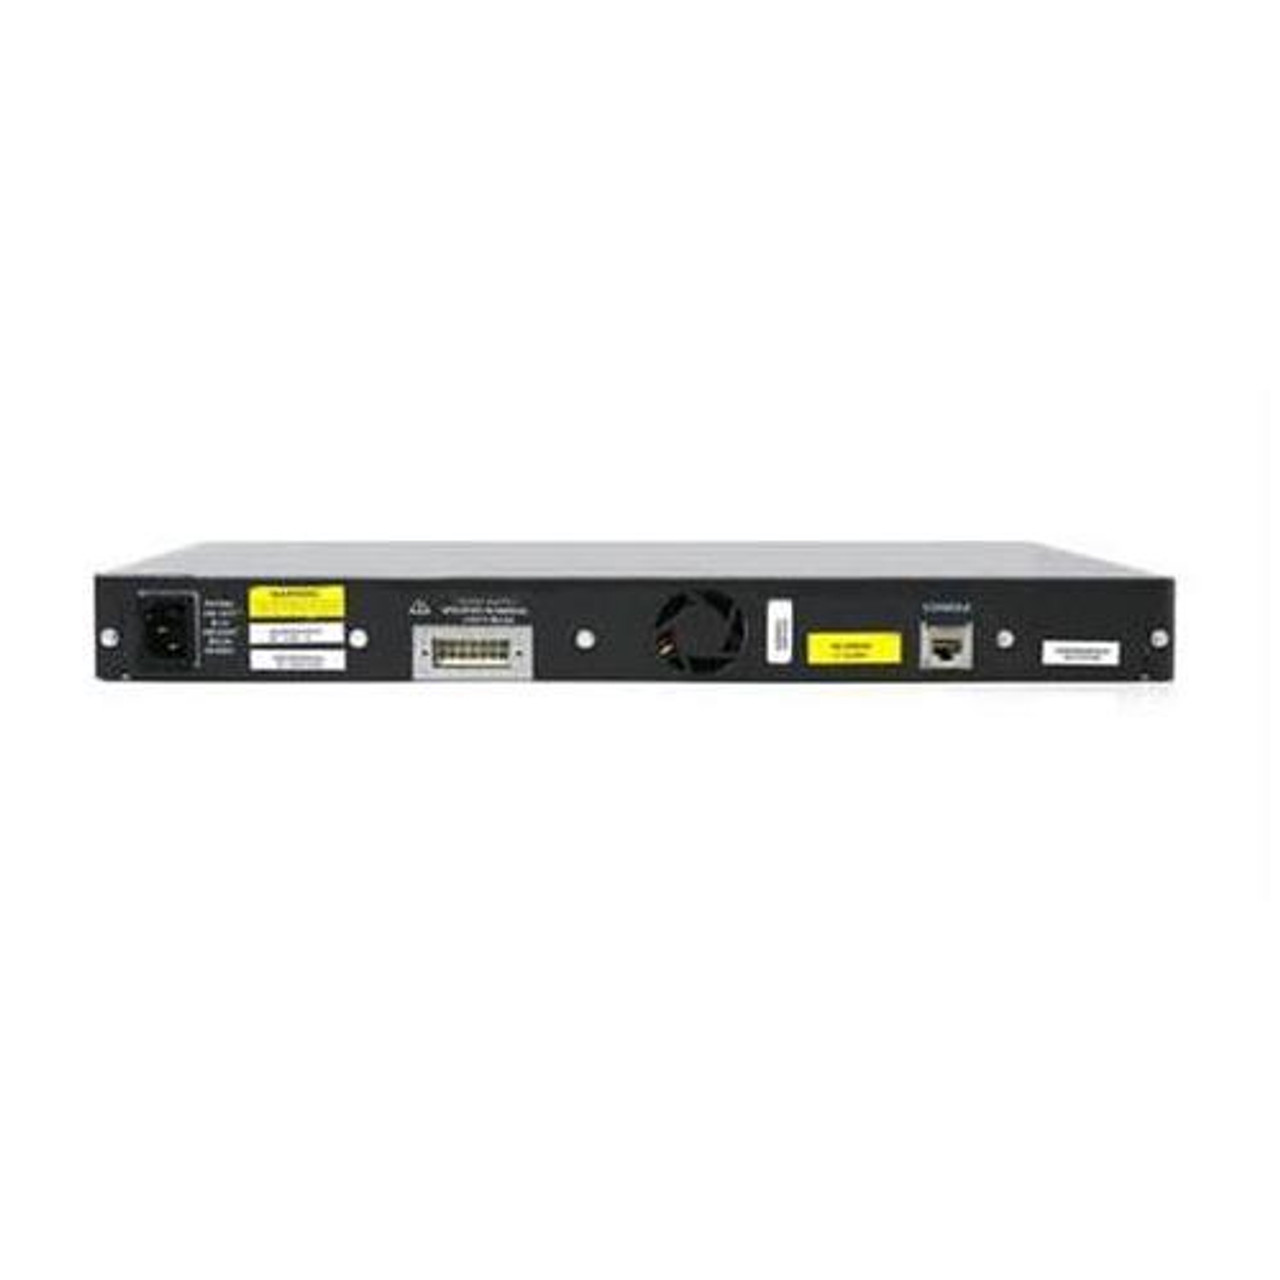 WS-X6066-SLB-APC - Cisco Catalyst 6500 7600 Content Switching Module (Refurbished)